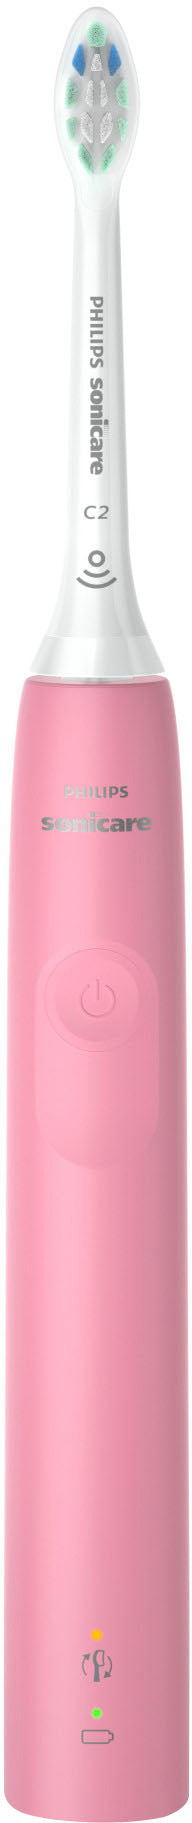 Philips Sonicare 4100 Power Toothbrush - Deep Pink_1